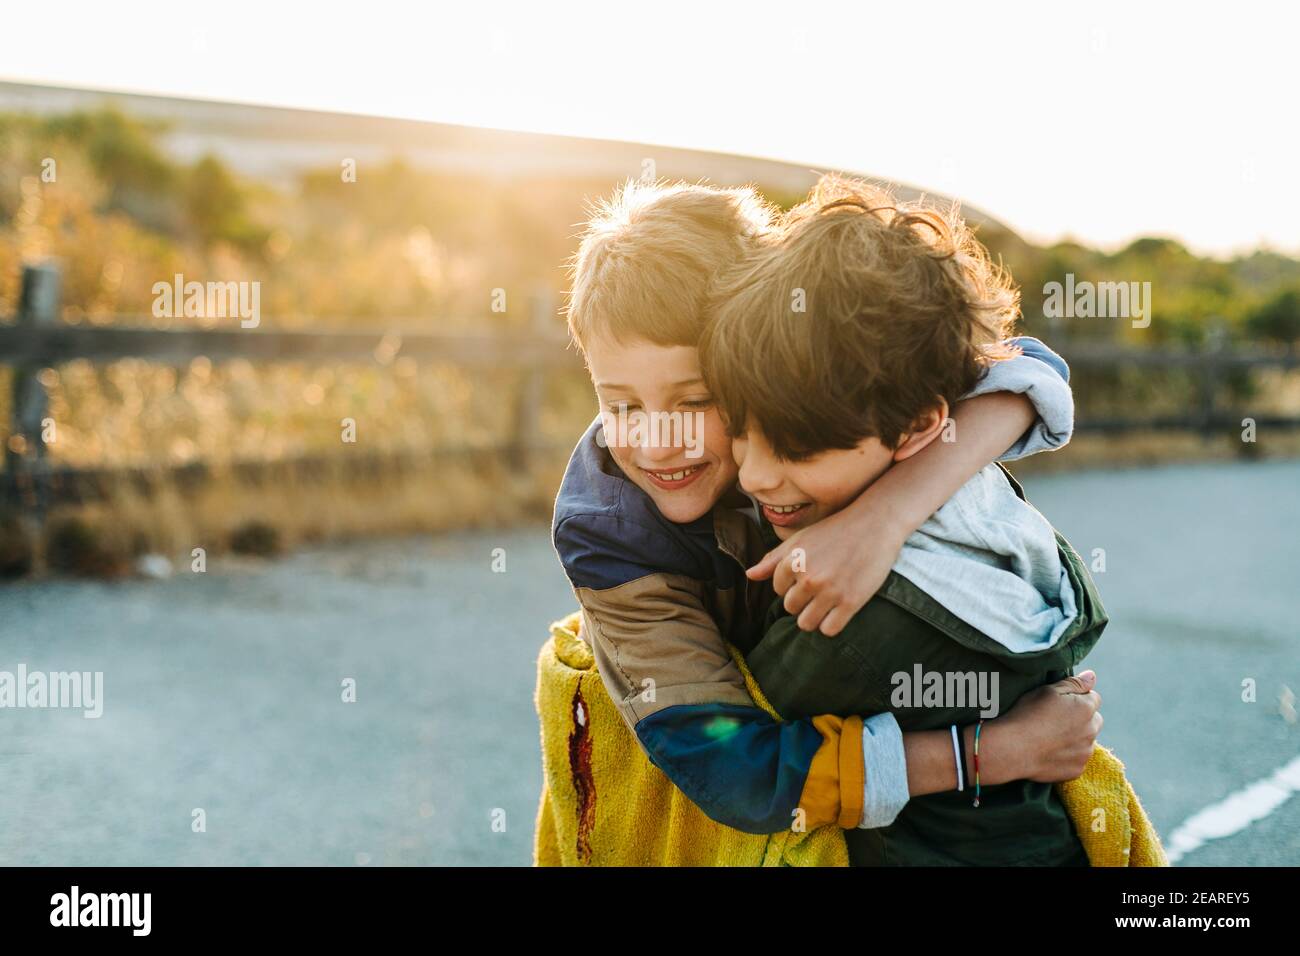 Back flare light over tweens brothers hugging in road park at sunrise Stock Photo